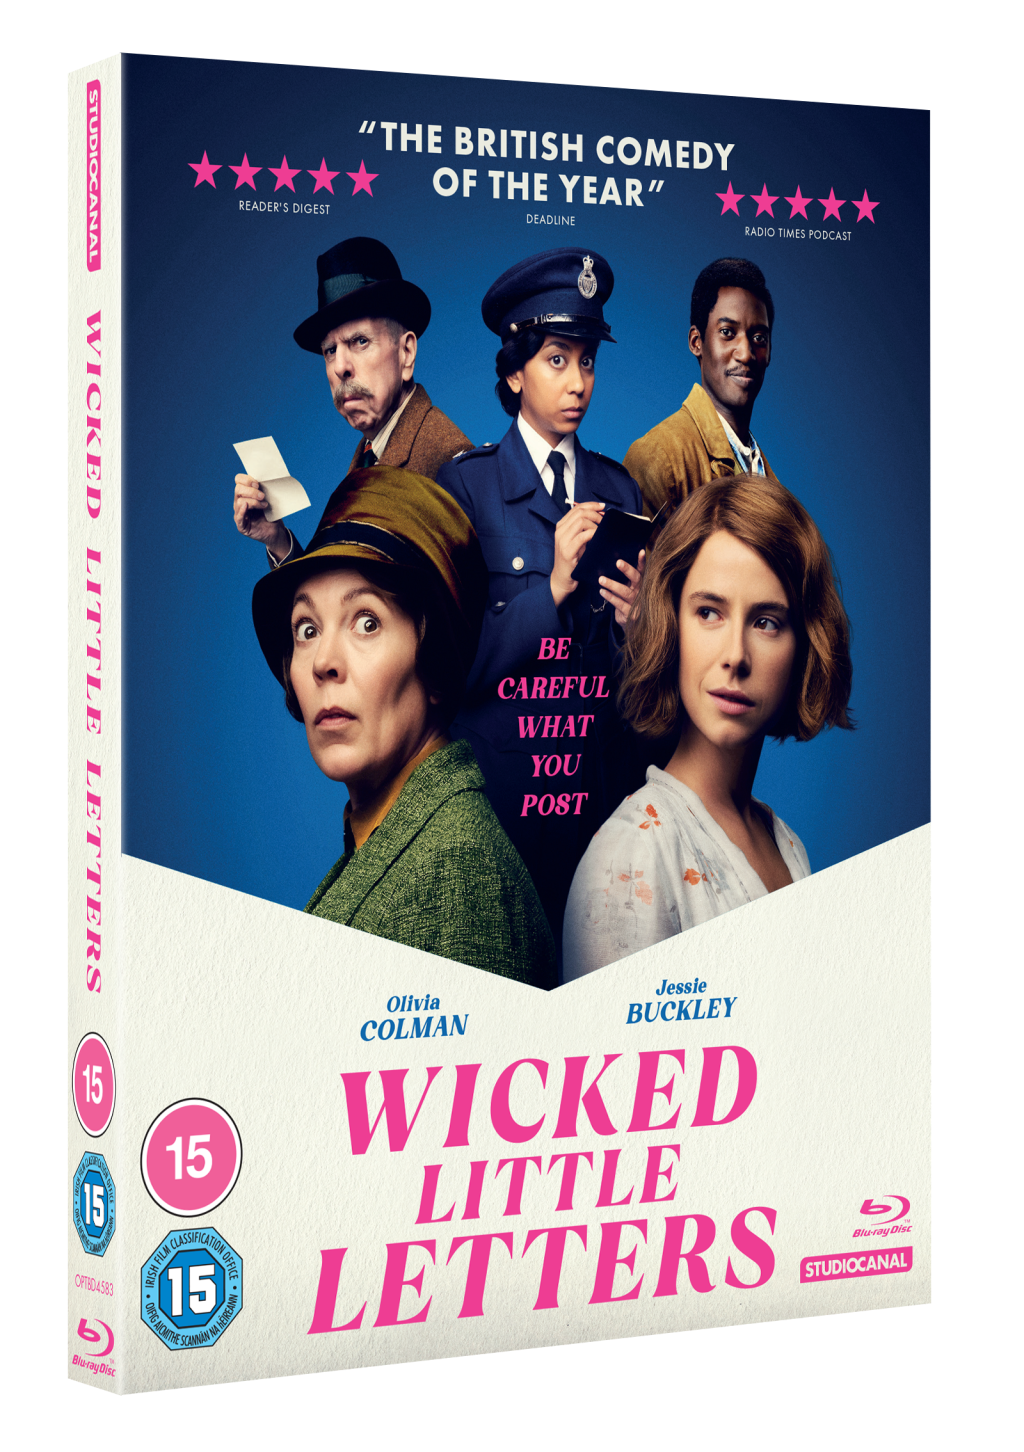 Win Wicked Little Letters, starring Jessie Buckley and Olivia Colman on Blu-ray!